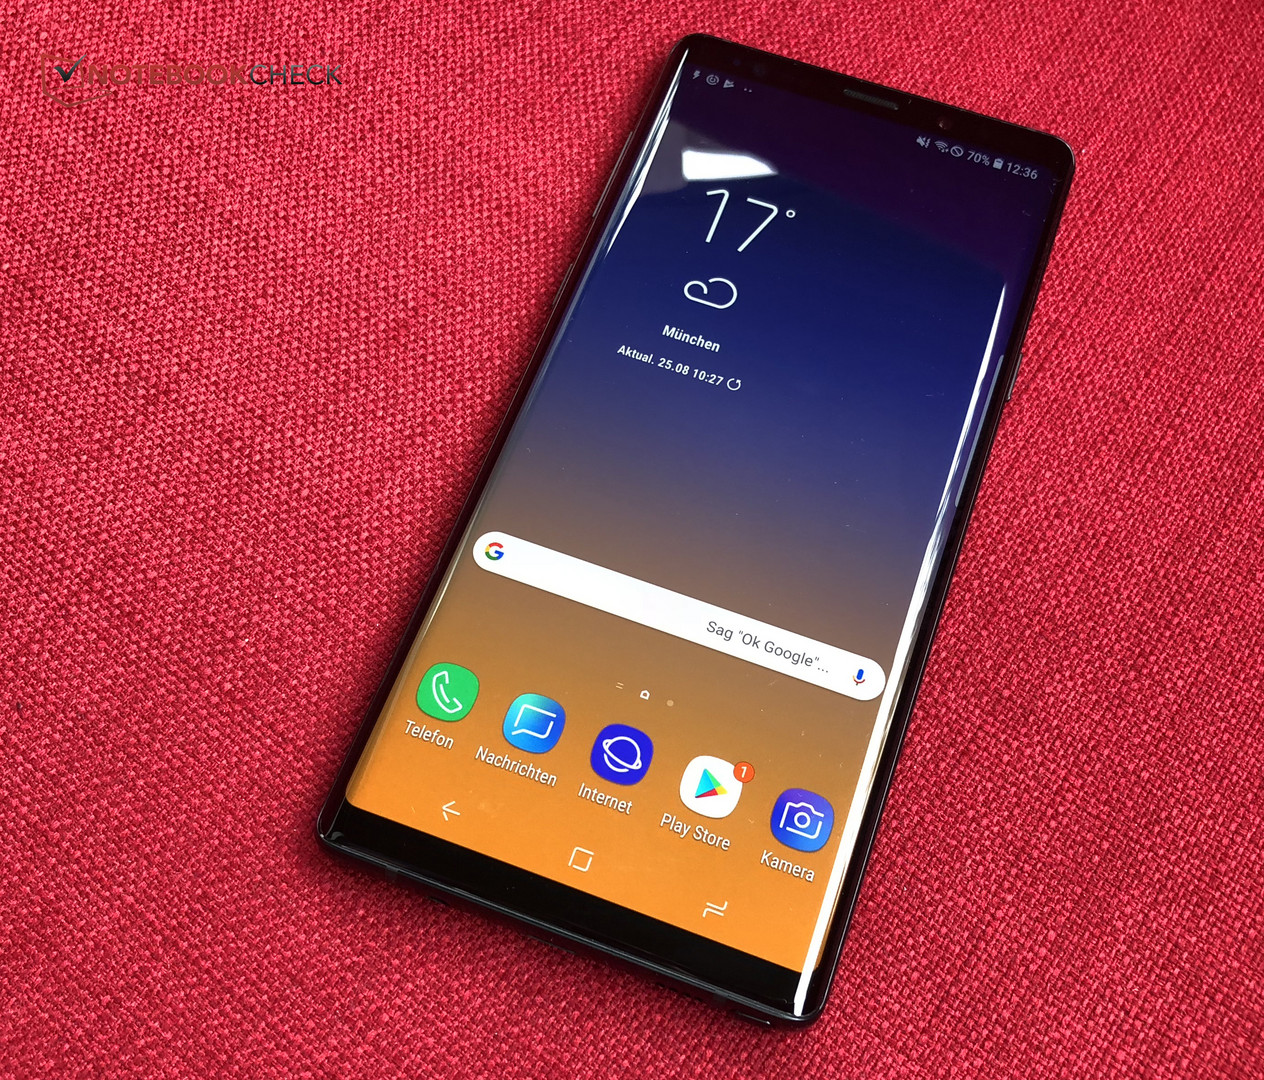 Samsung Galaxy Note 9 Smartphone Review - NotebookCheck.net Reviews